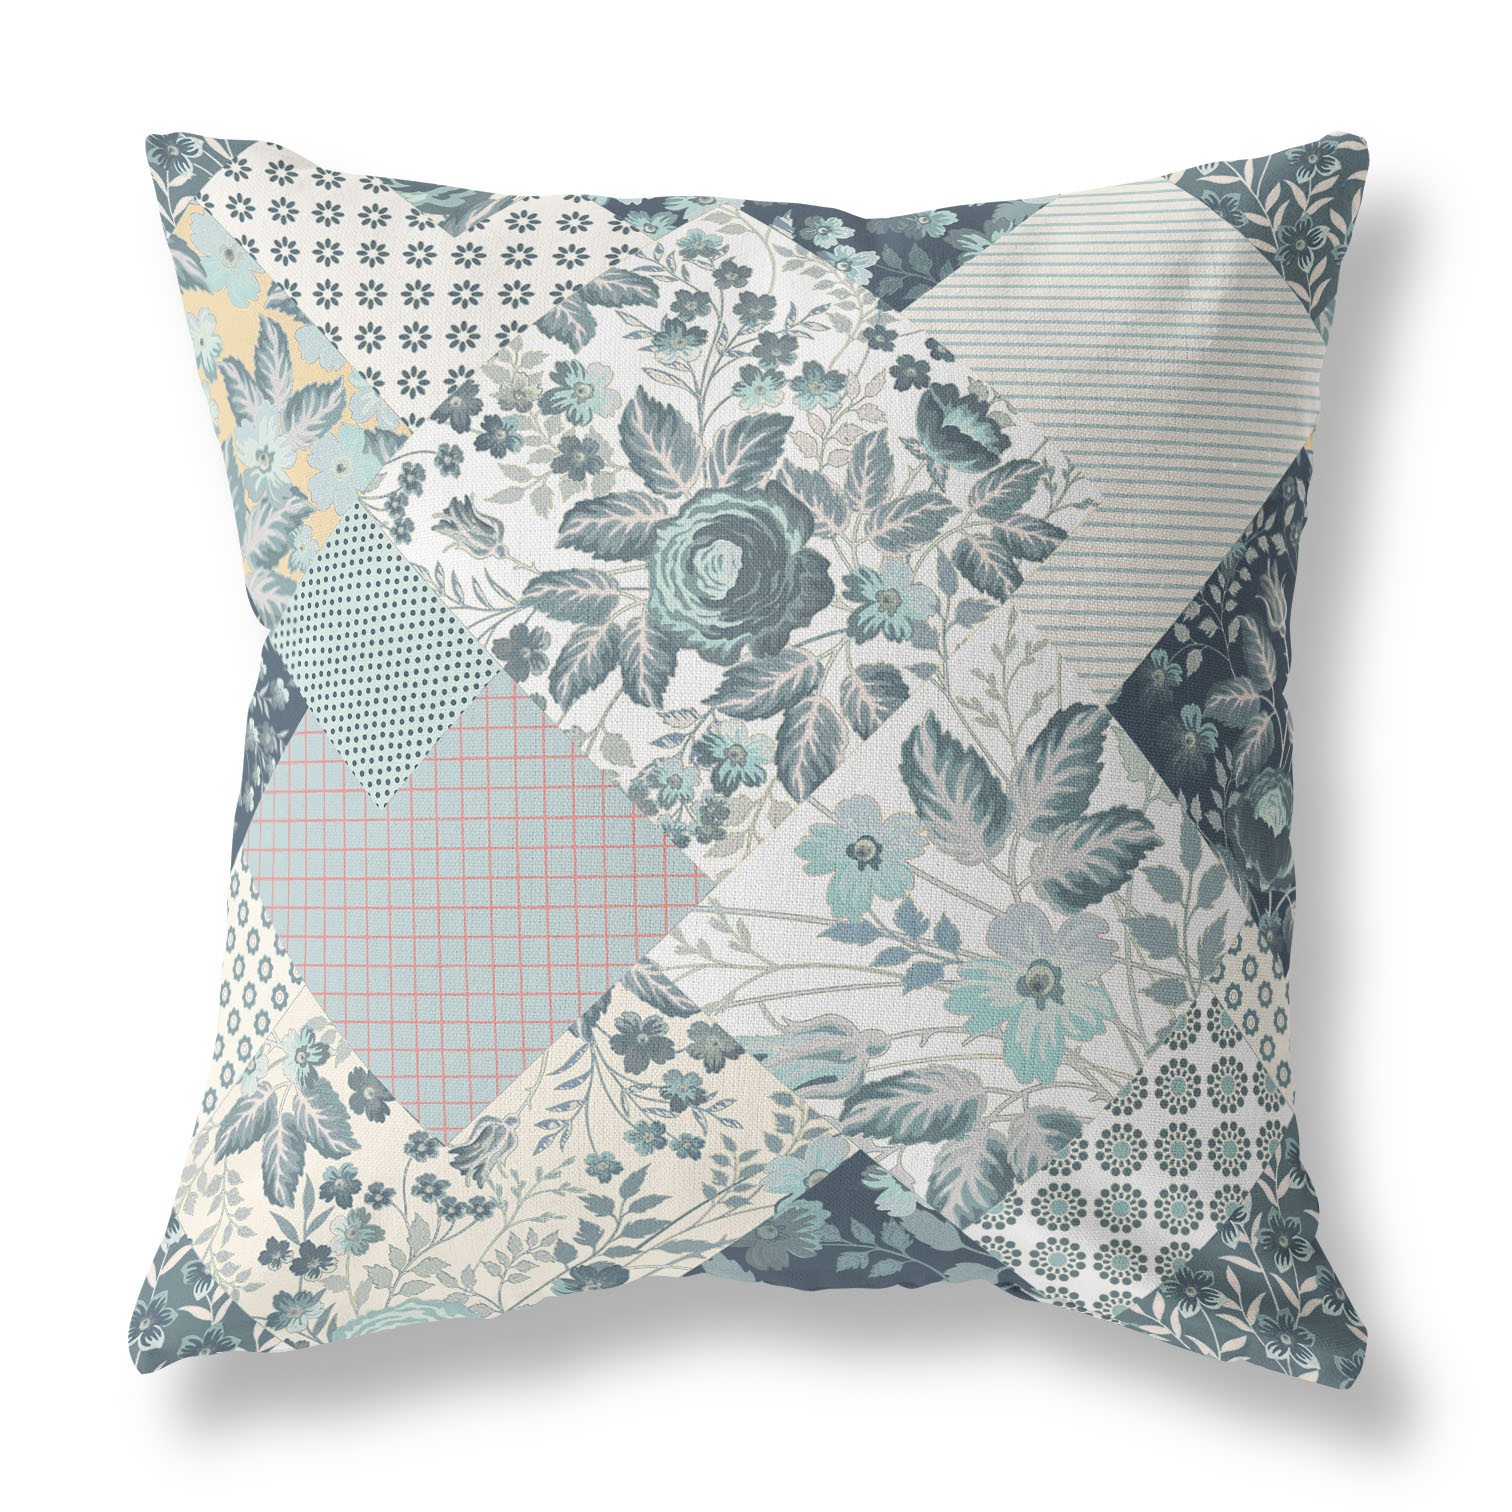 20" Teal White Boho Floral Indoor Outdoor Throw Pillow-413912-1